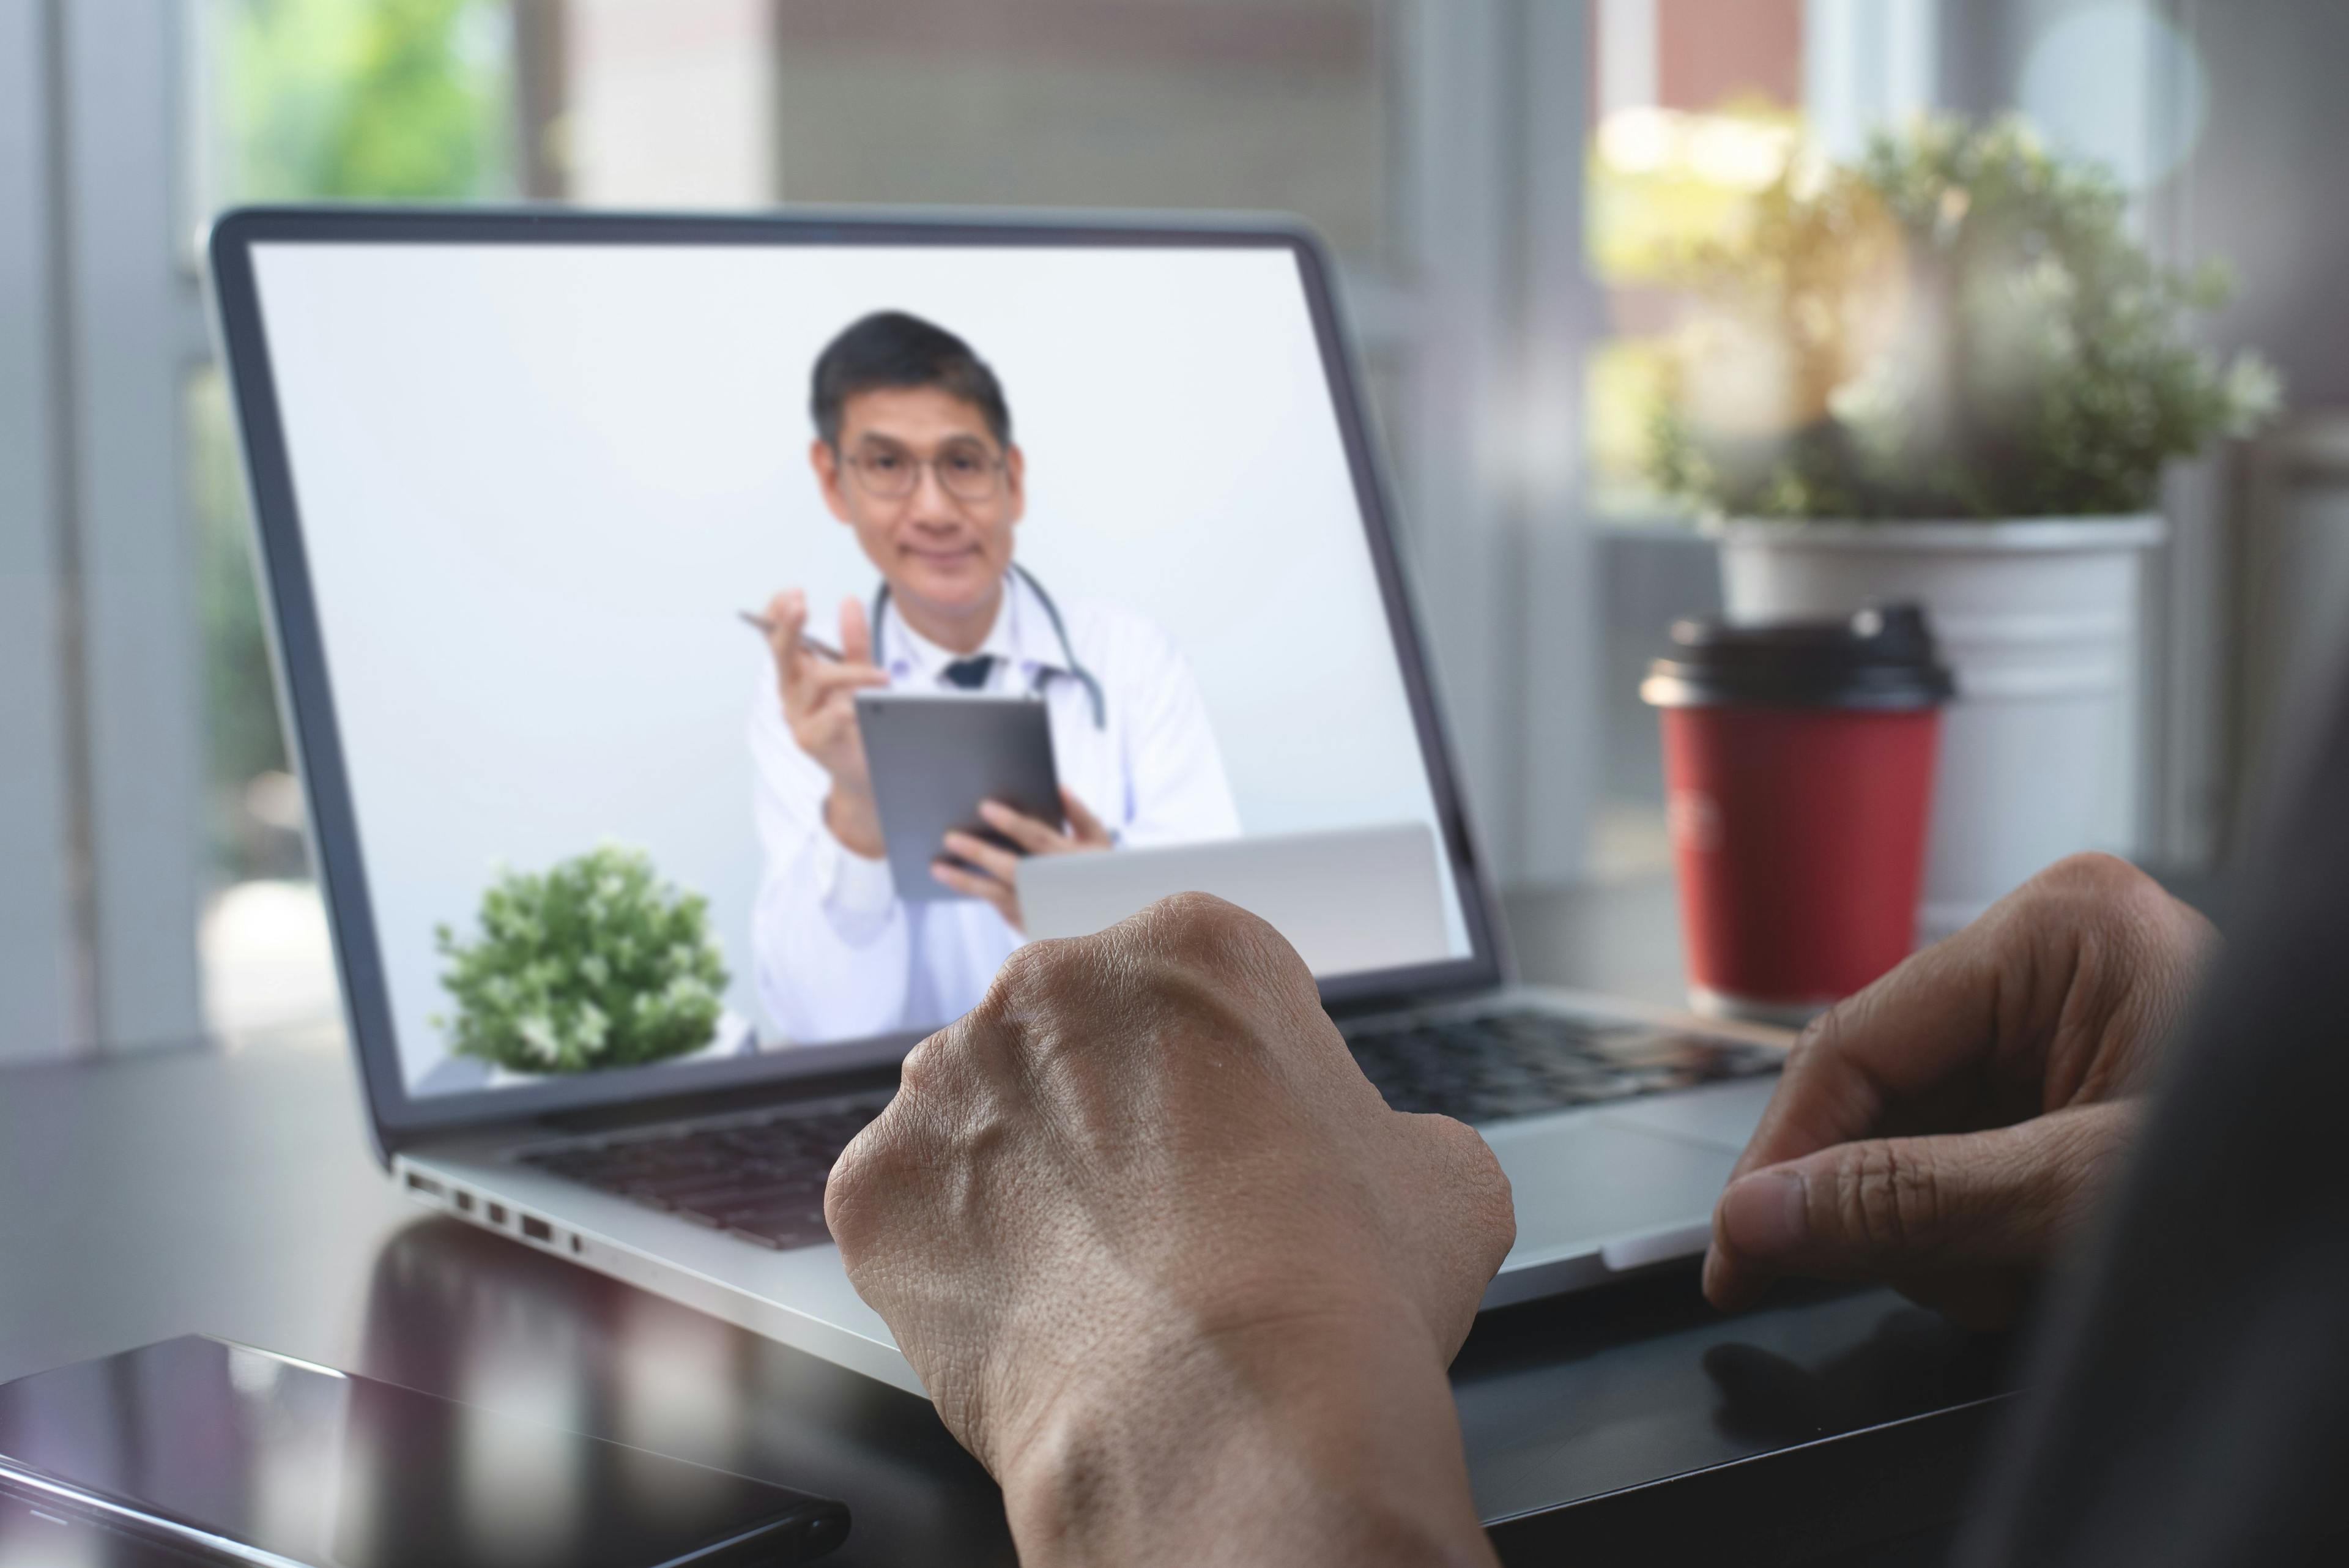 Healthcare organizations need to make sure clinicians are comfortable with telehealth, or their virtual care offerings may not reach their potential. (Image credit: ©Tippapat - stock.adobe.com)